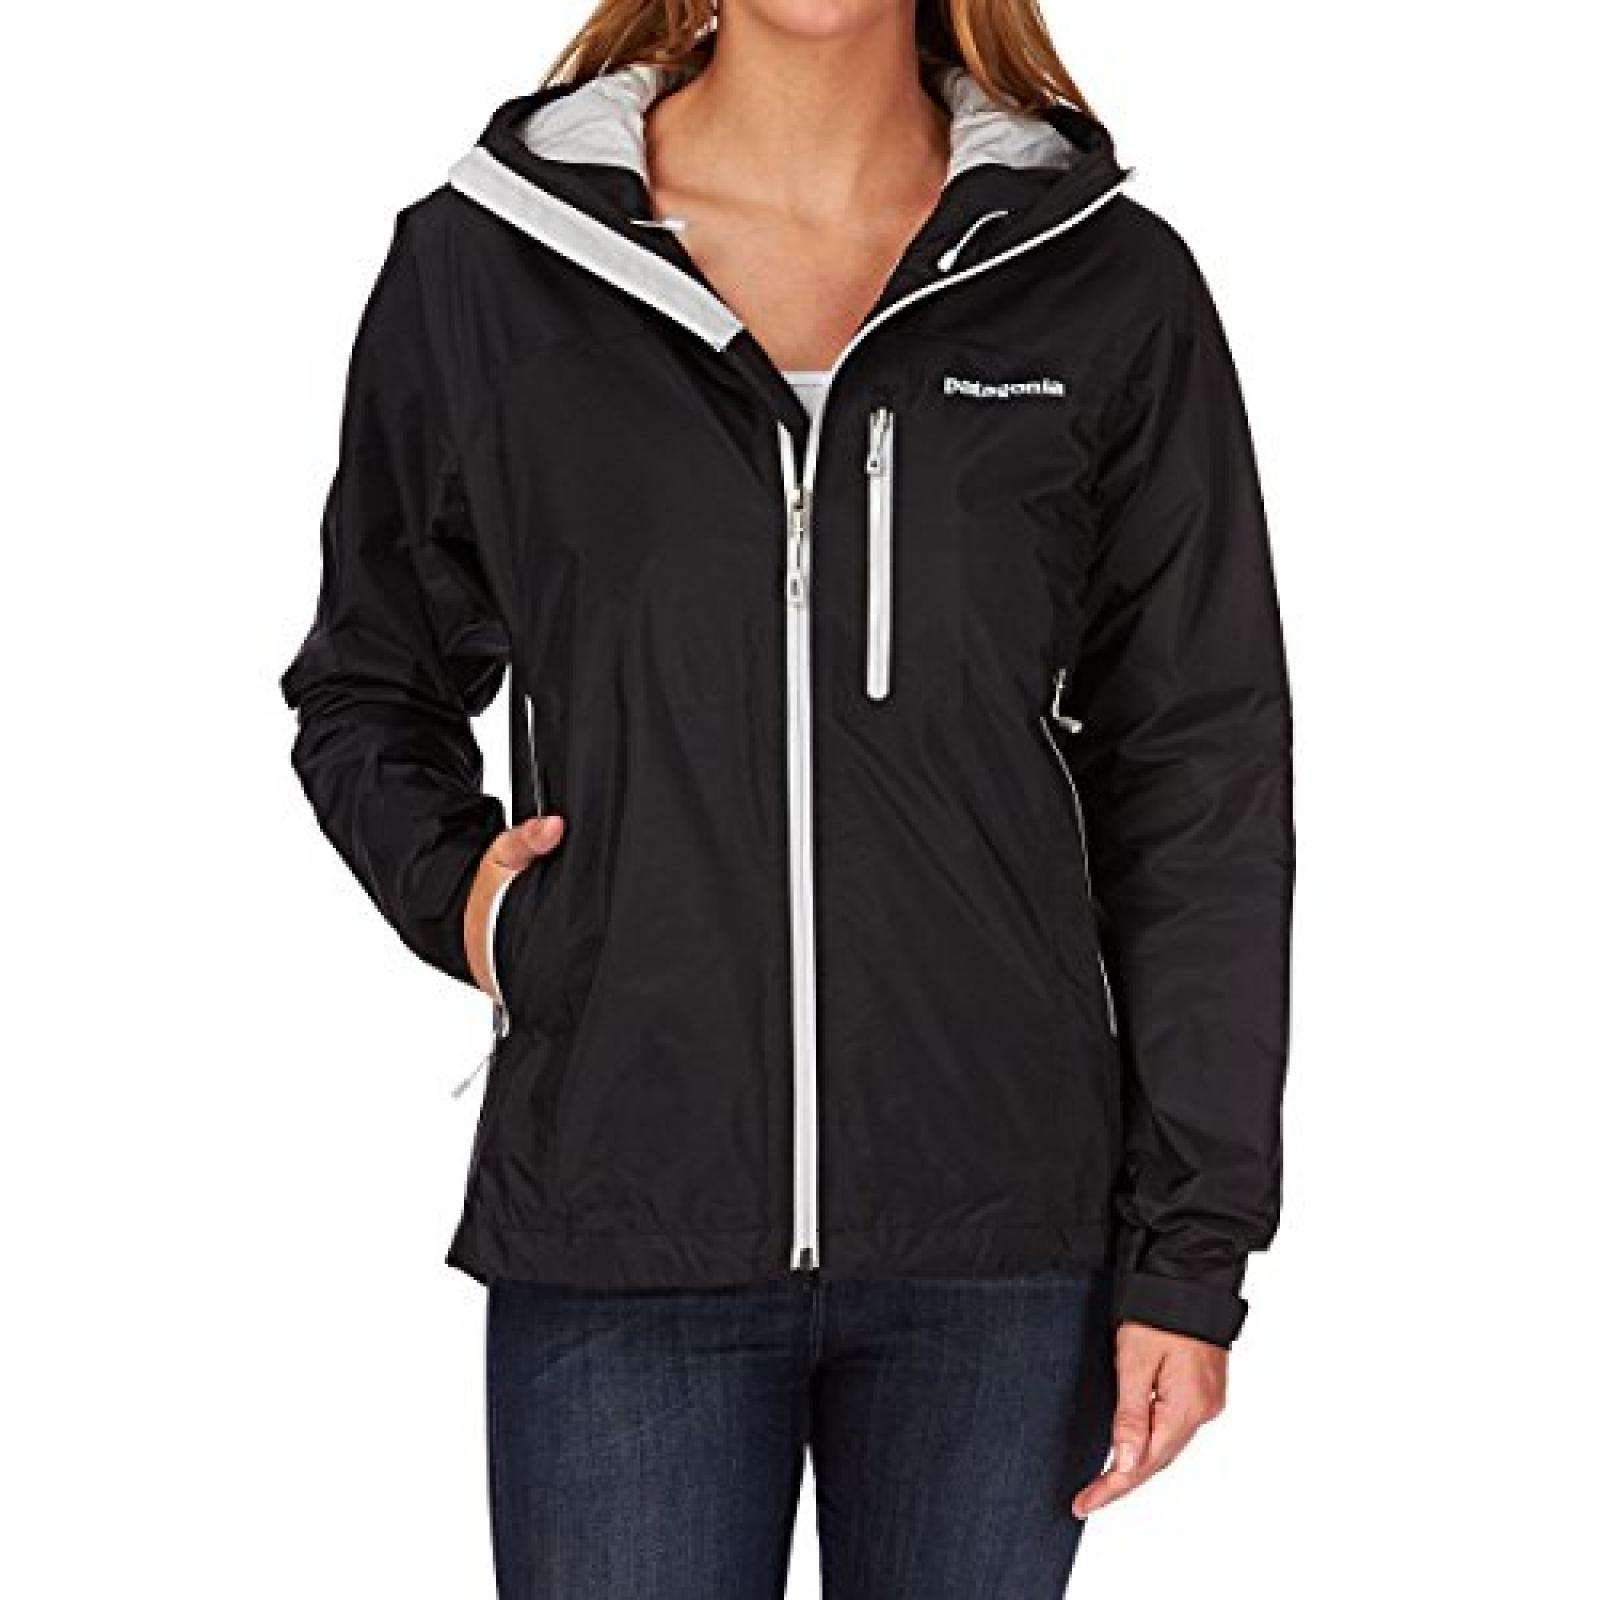 Patagonia Insulated Torrentshell Jacket - Black/tailored Grey 